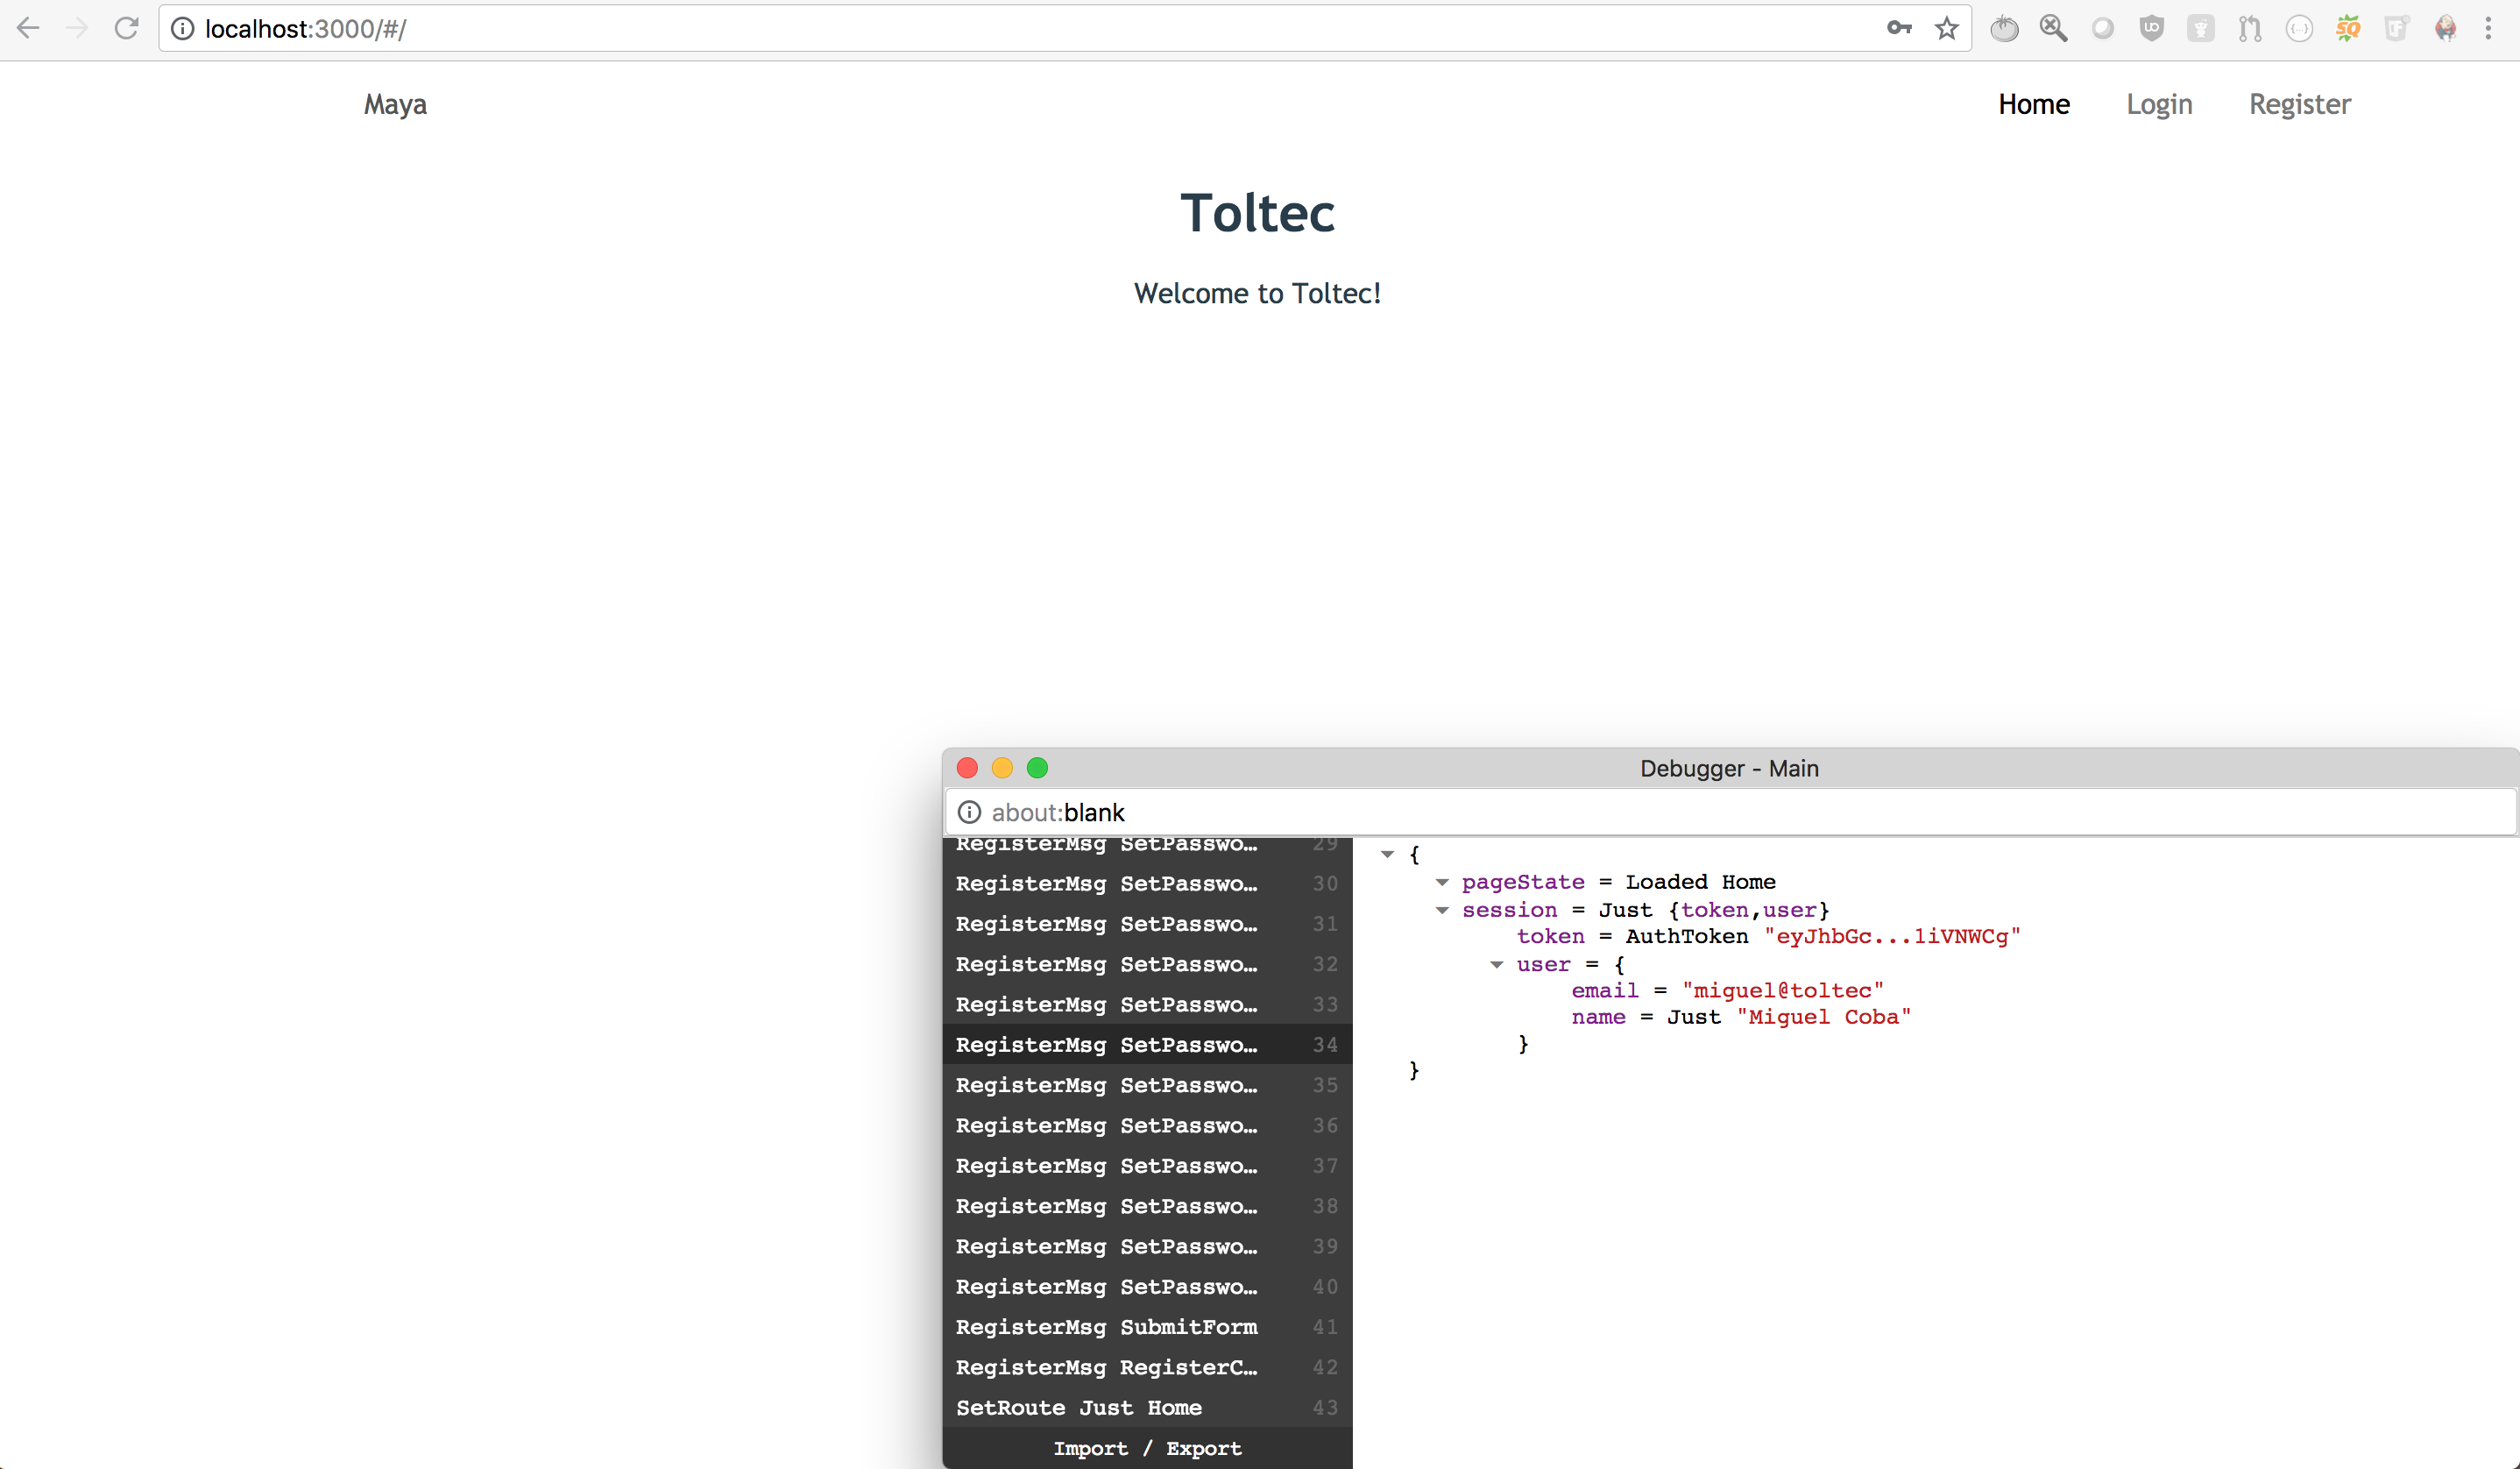 Toltec Home page after user creation and automatic loggin in